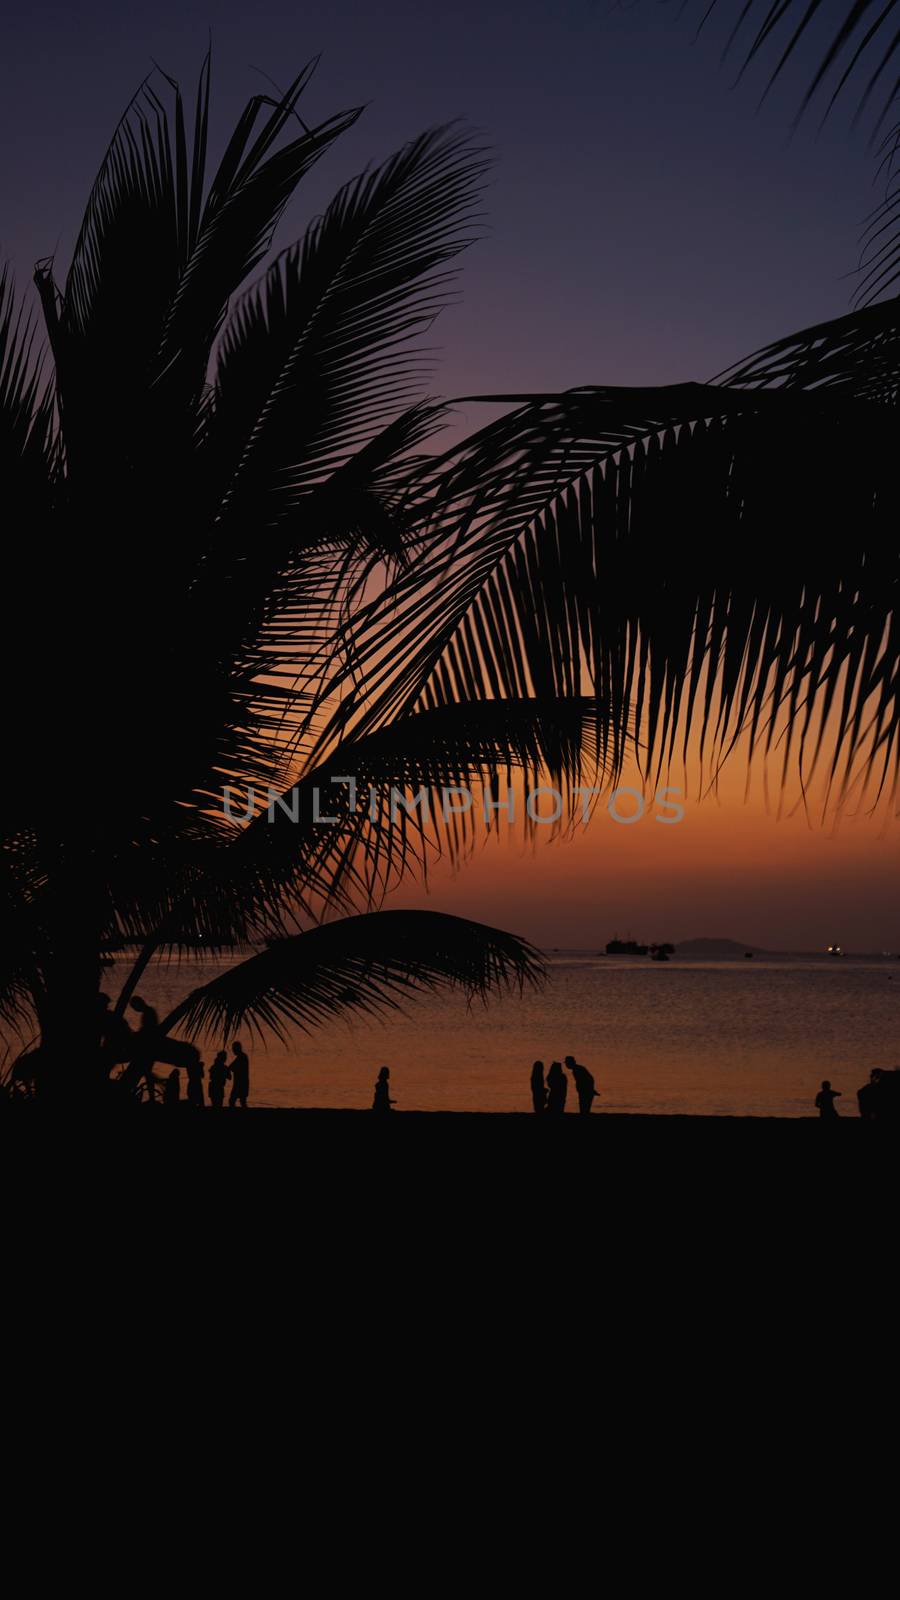 Silhouette of people on tropical beach at sunset - Tourists enjoying time in summer vacation - Travel, holidays and landscape concept - Focus on palm tree - vertical